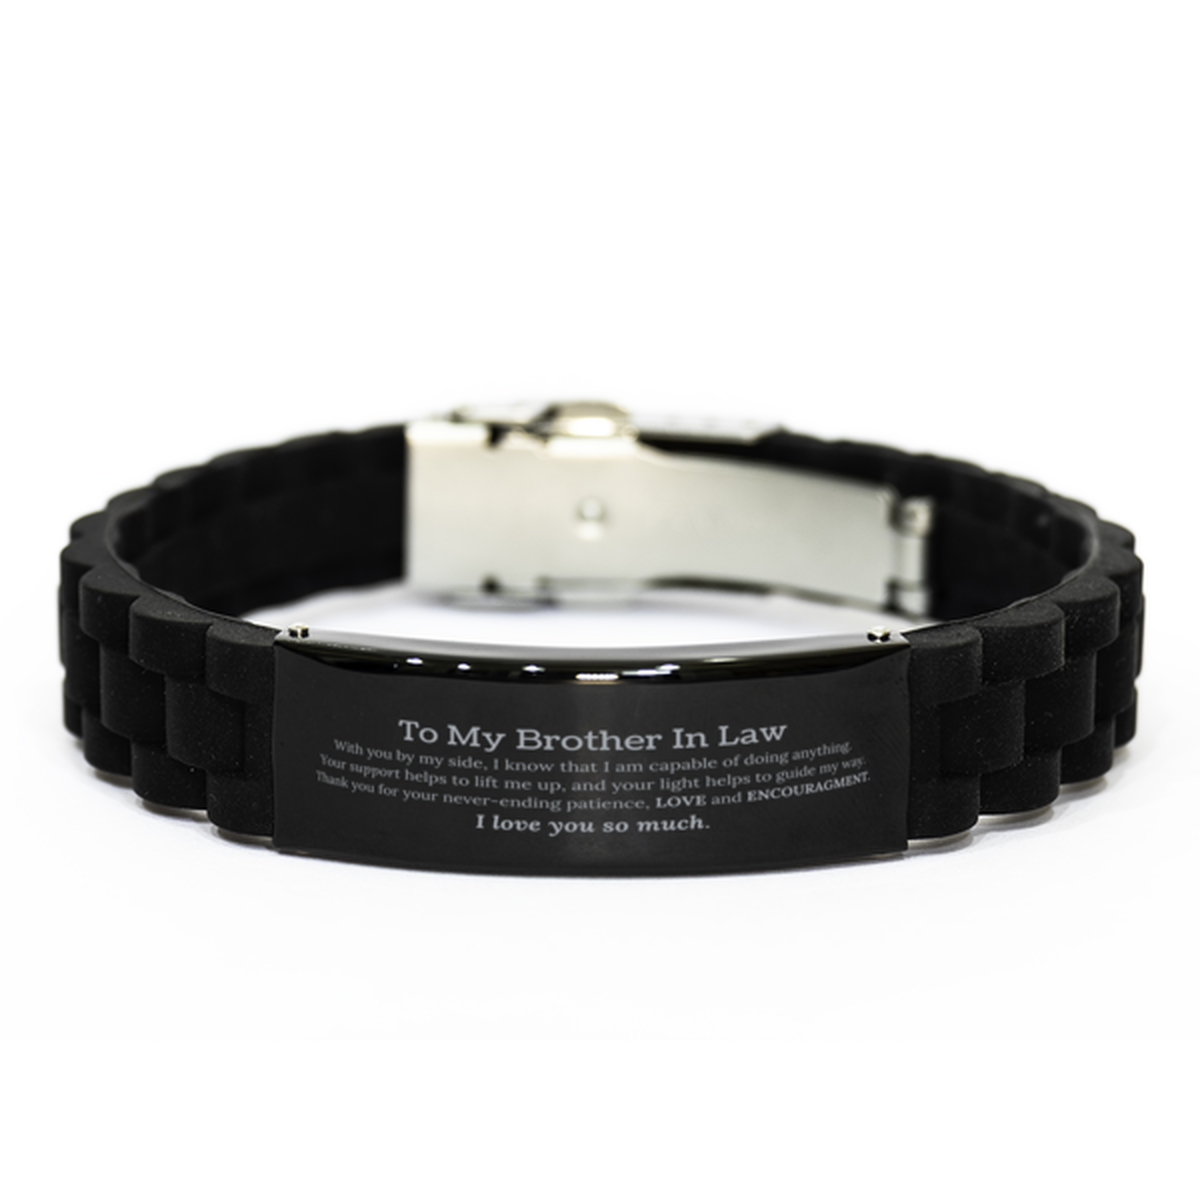 Appreciation Brother In Law Black Glidelock Clasp Bracelet Gifts, To My Brother In Law Birthday Christmas Wedding Keepsake Gifts for Brother In Law With you by my side, I know that I am capable of doing anything. I love you so much